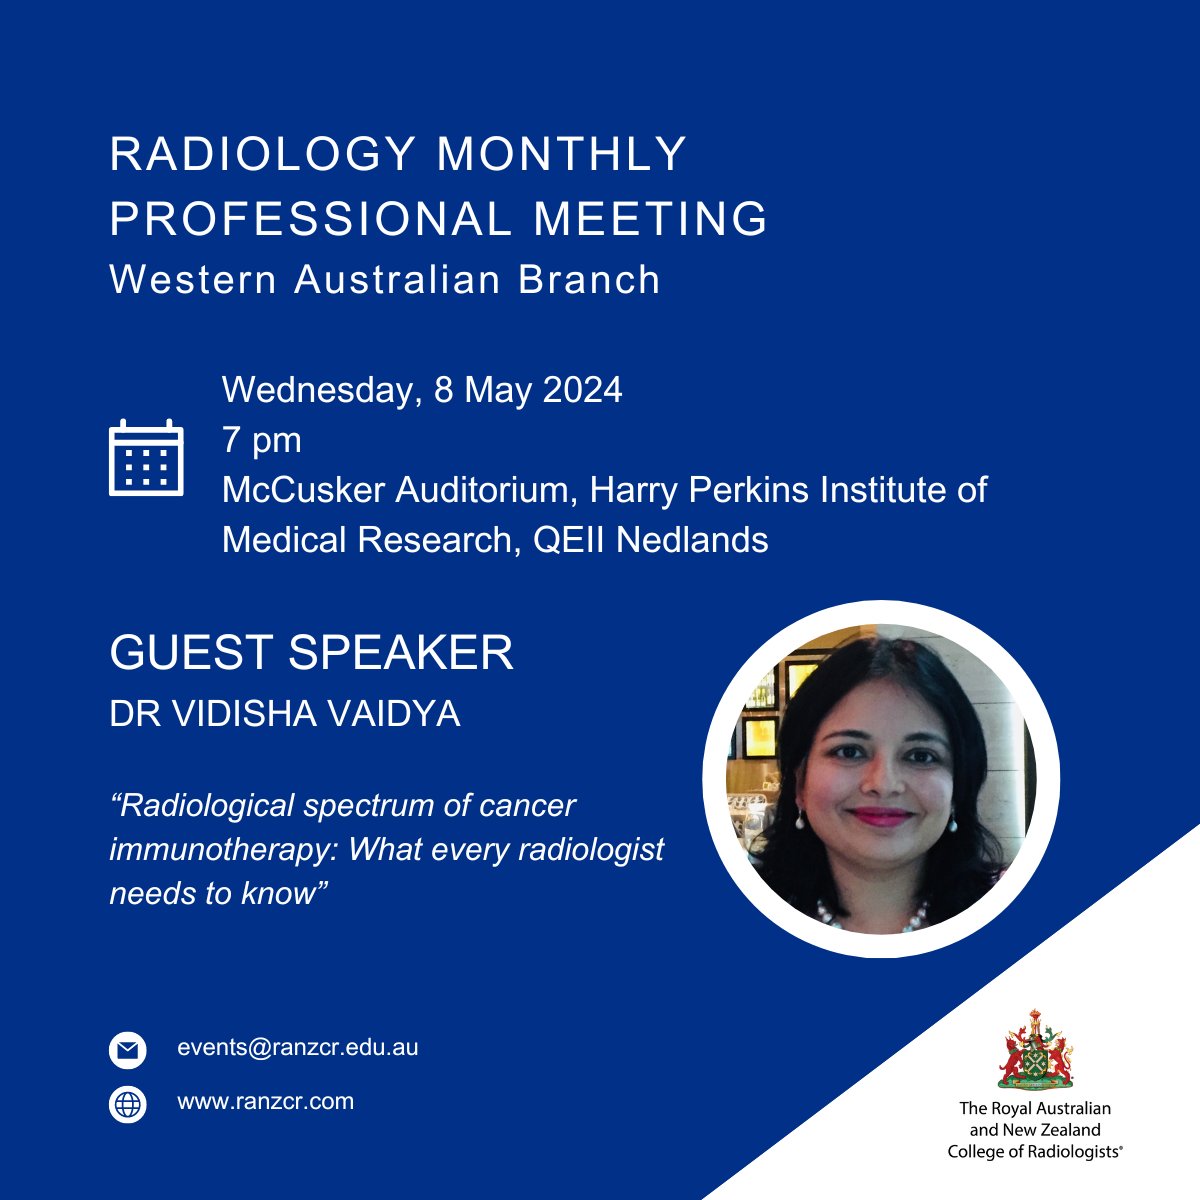 WA branch members: Don't miss Dr Vidisha Vaidya speaking on 'Radiological spectrum of cancer immunotherapy: What every radiologist needs to know” at our upcoming Radiology Monthly Professional Meeting from 6pm Wed 8 May, chaired by Clin A/Prof Glen Lo @g13nl0 #RANZCR #radiology